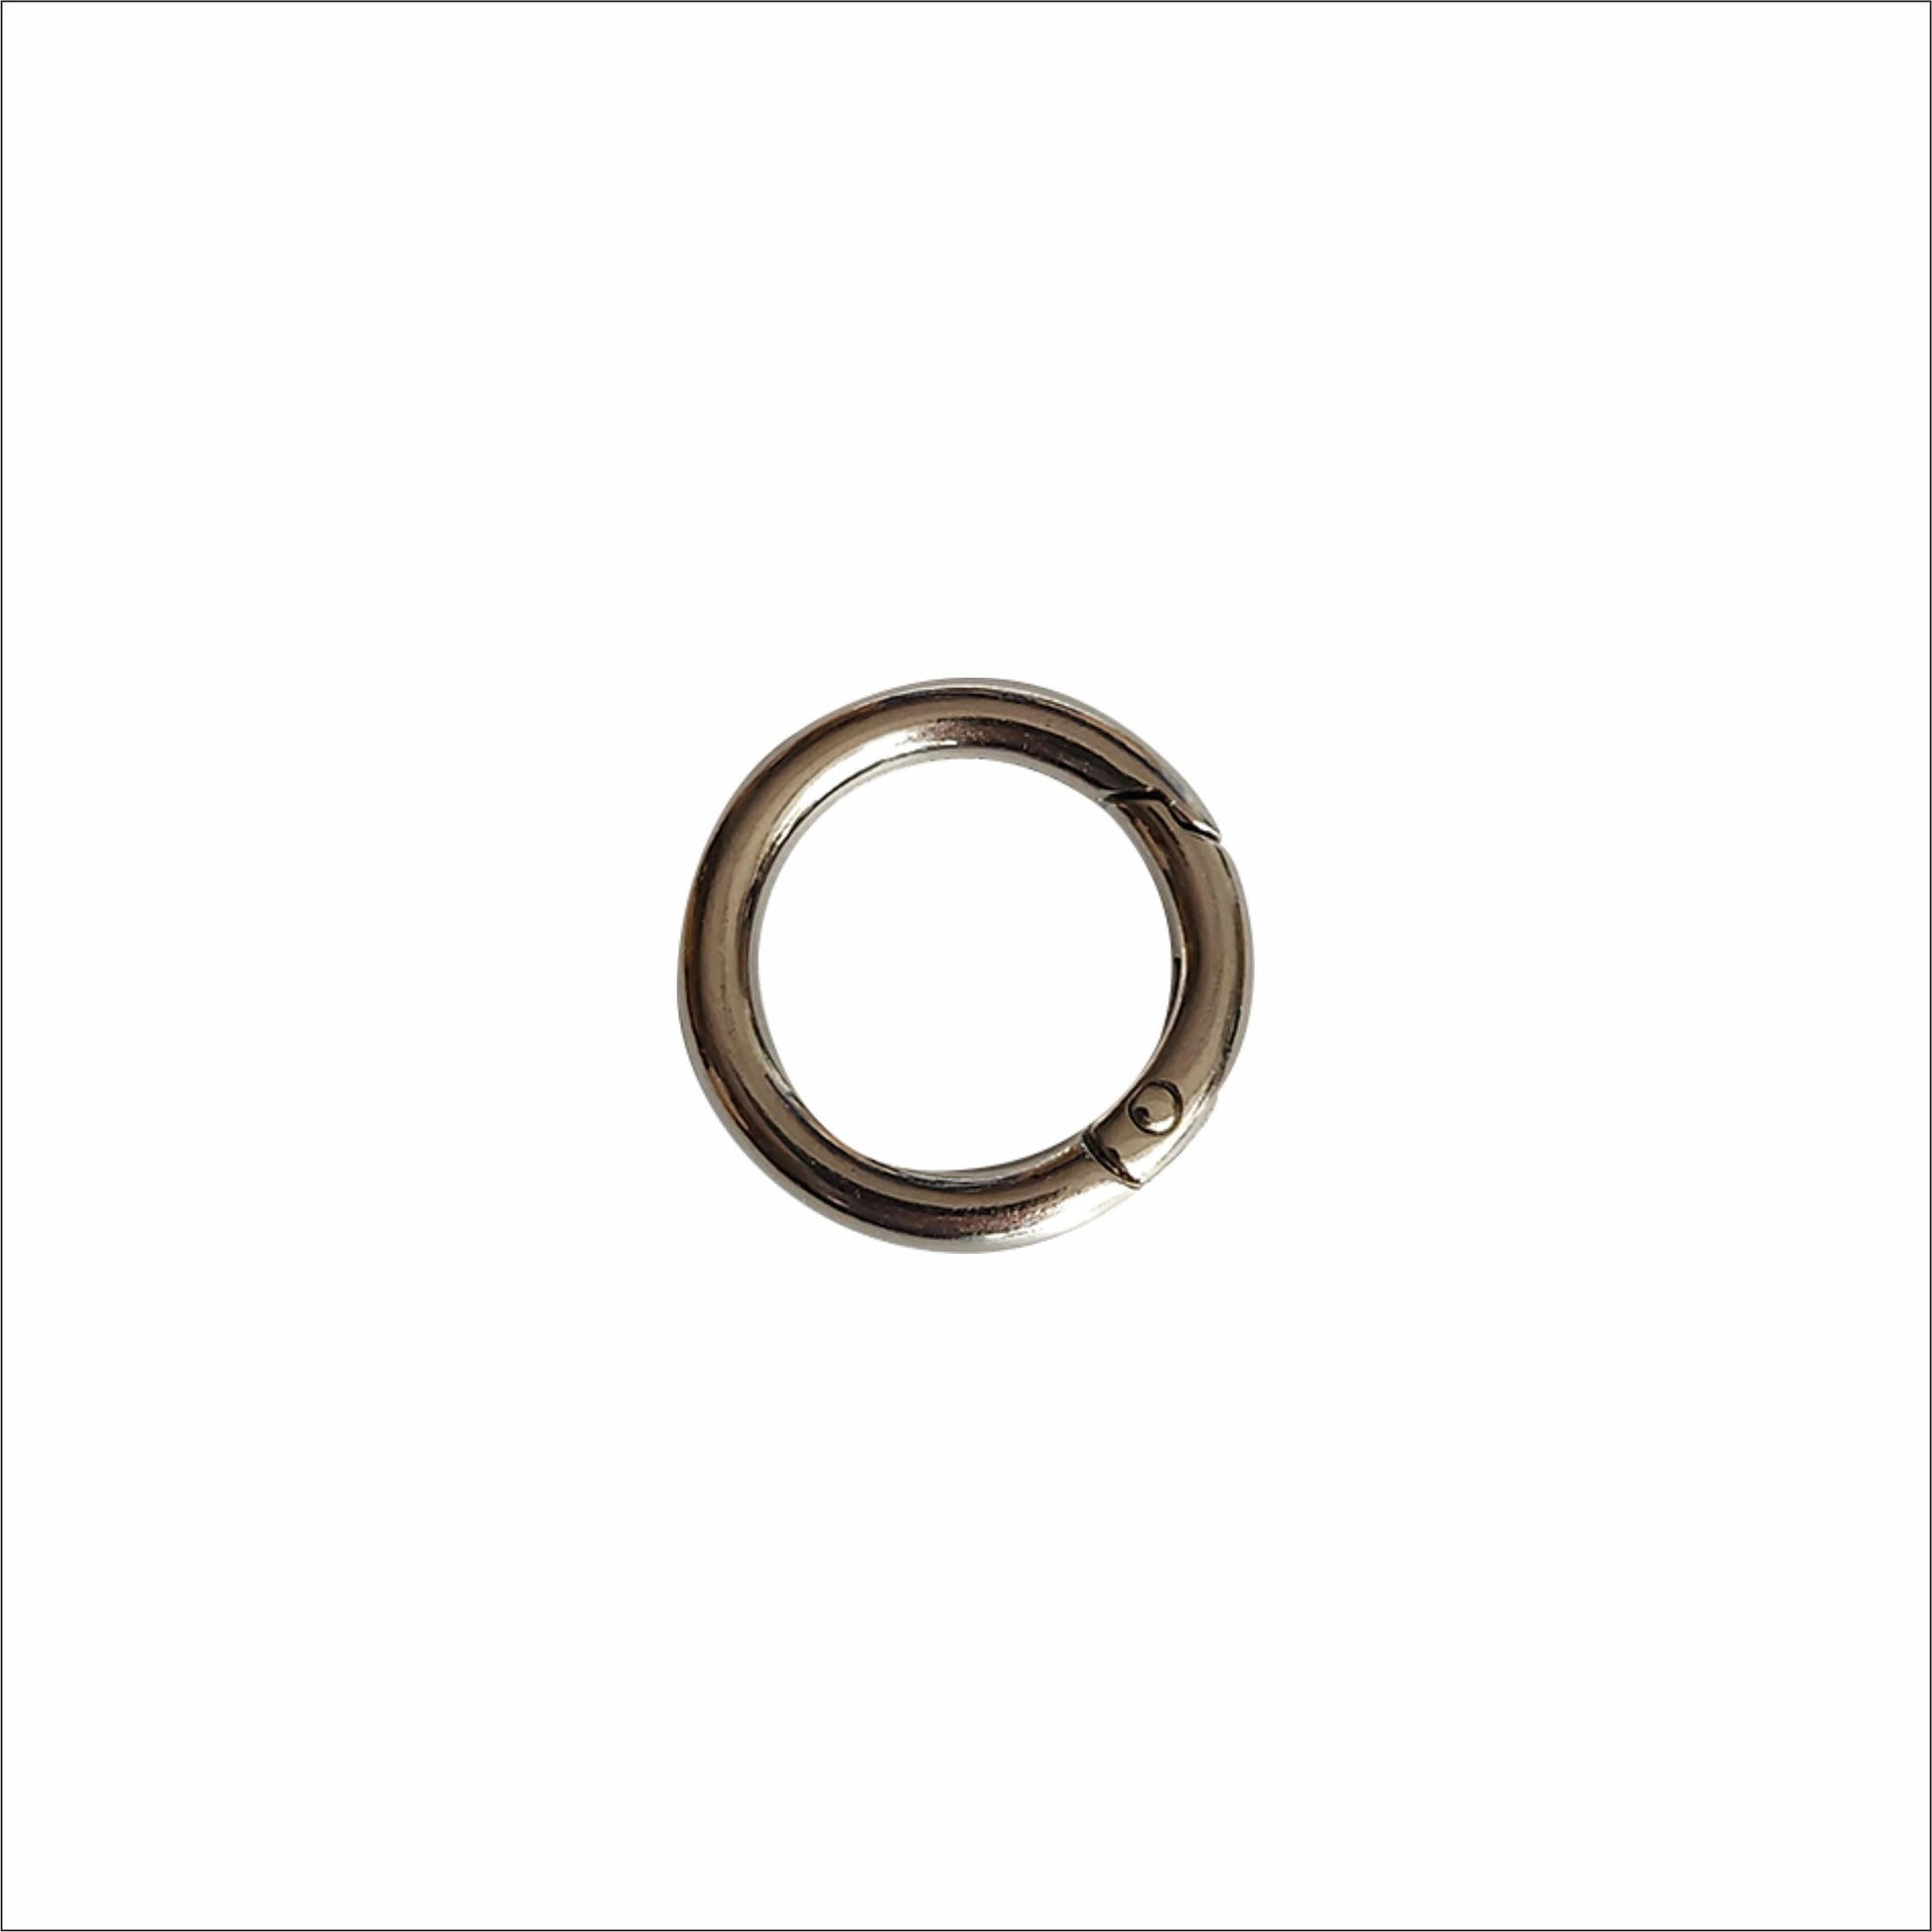 Spring Gate O Ring - 20mm x 4mm - Cams Cords